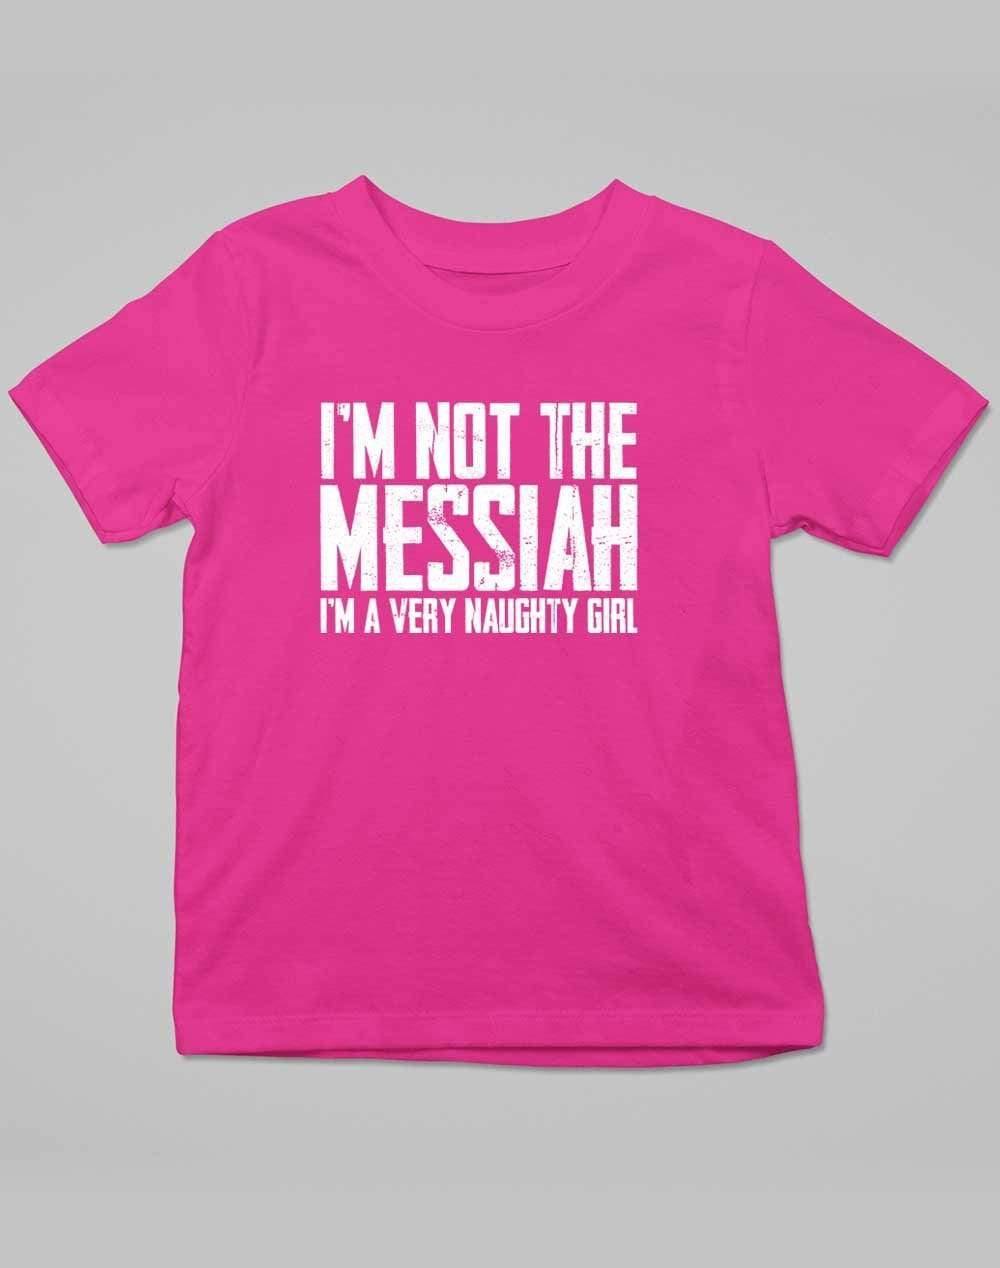 I'm Not the Messiah I'm a Very Naughty Girl Kids T-Shirt 3-4 years / Orchid Pink  - Off World Tees